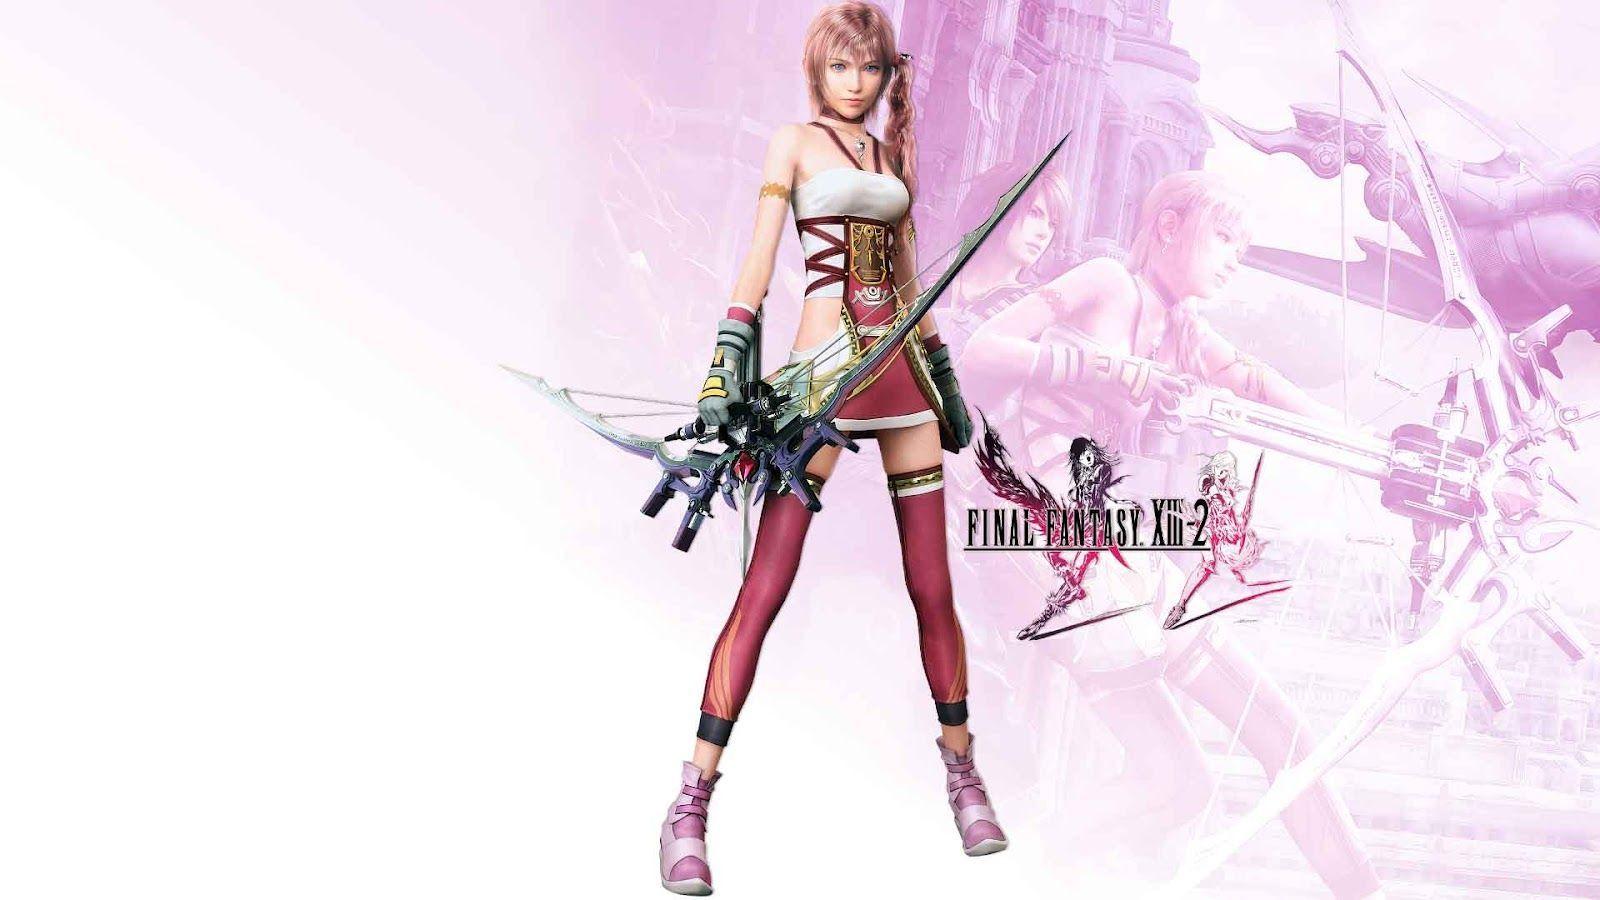 Ff13 Wallpapers 1920x1080